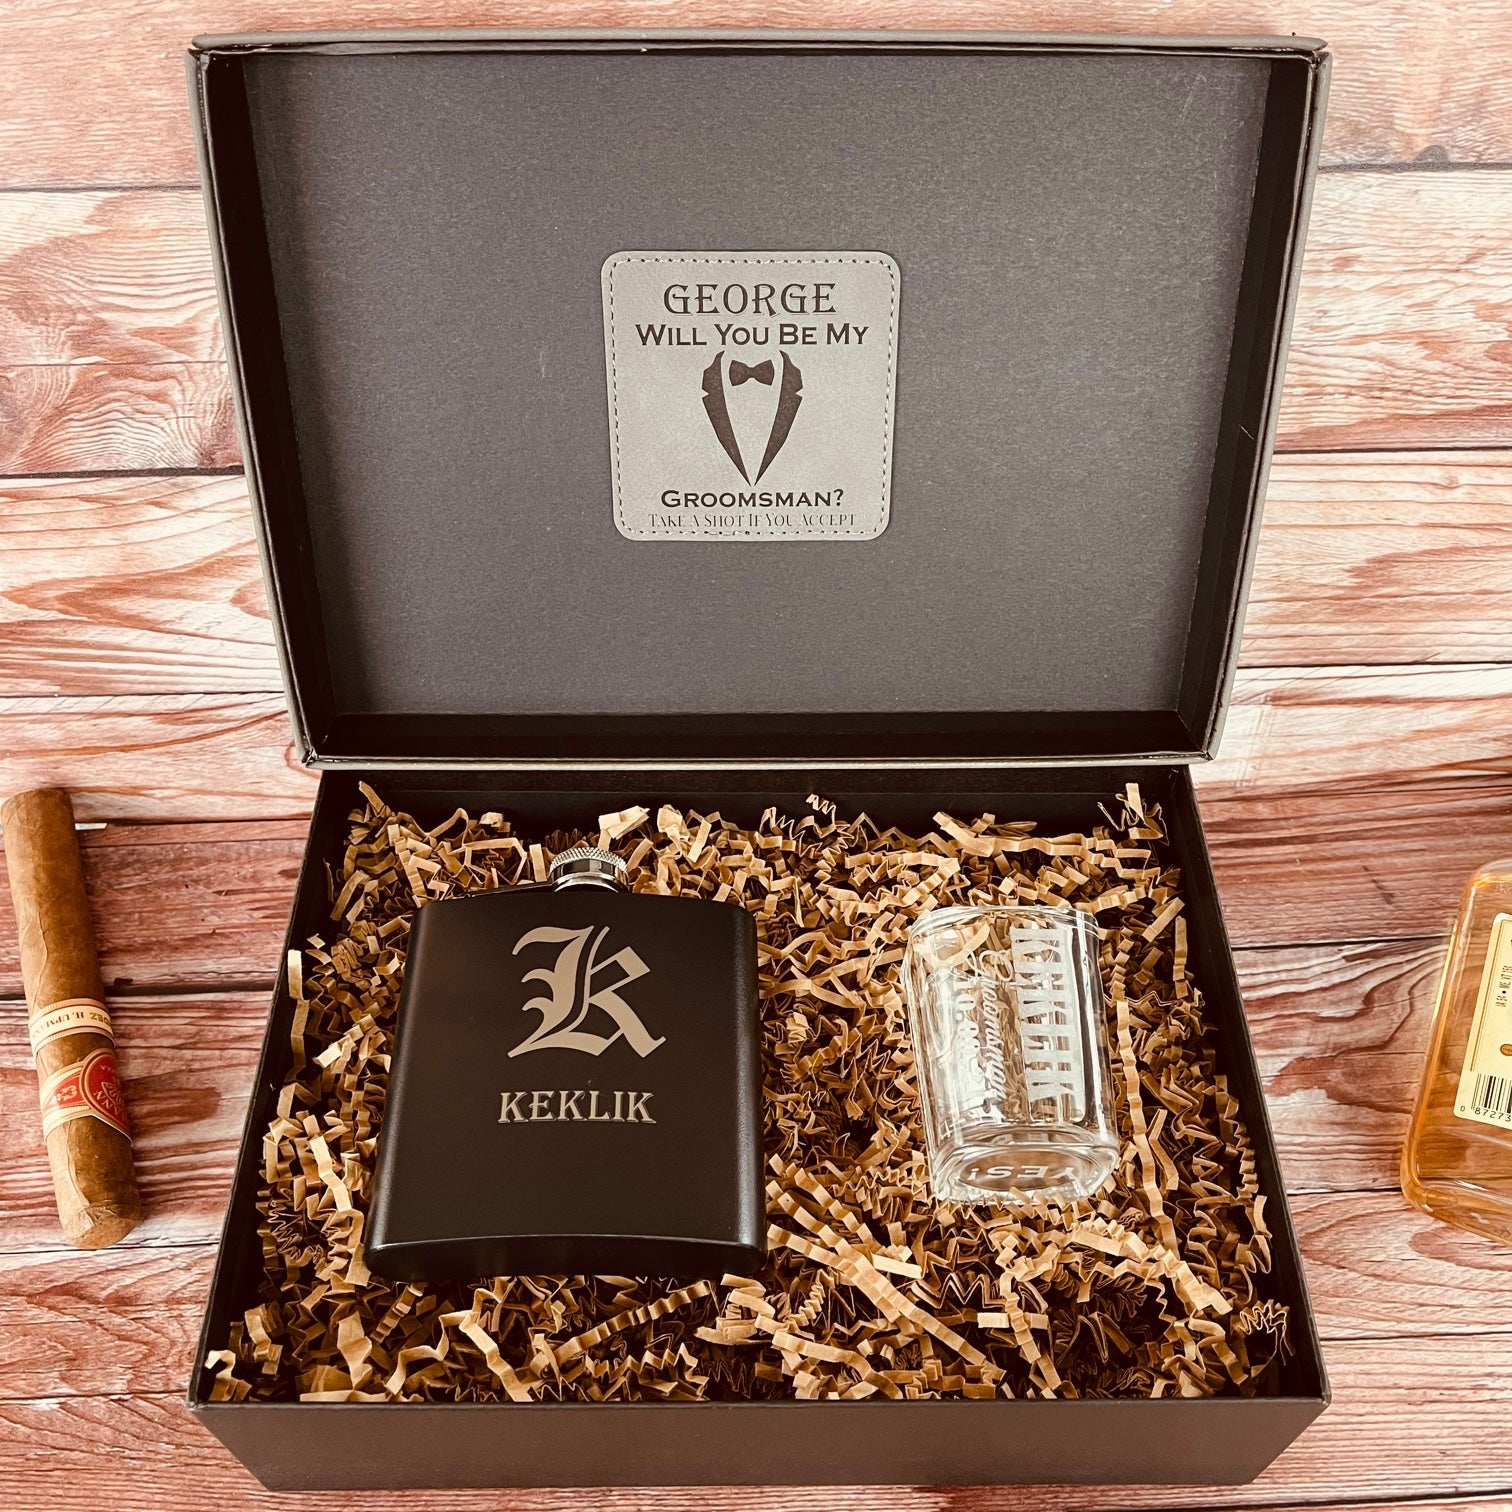 Personalized Groomsmen Proposal Gifts Create Your Own Groomsmen Gifts With  an Engraved Gift Box, Flask, Knife, and More - Etsy